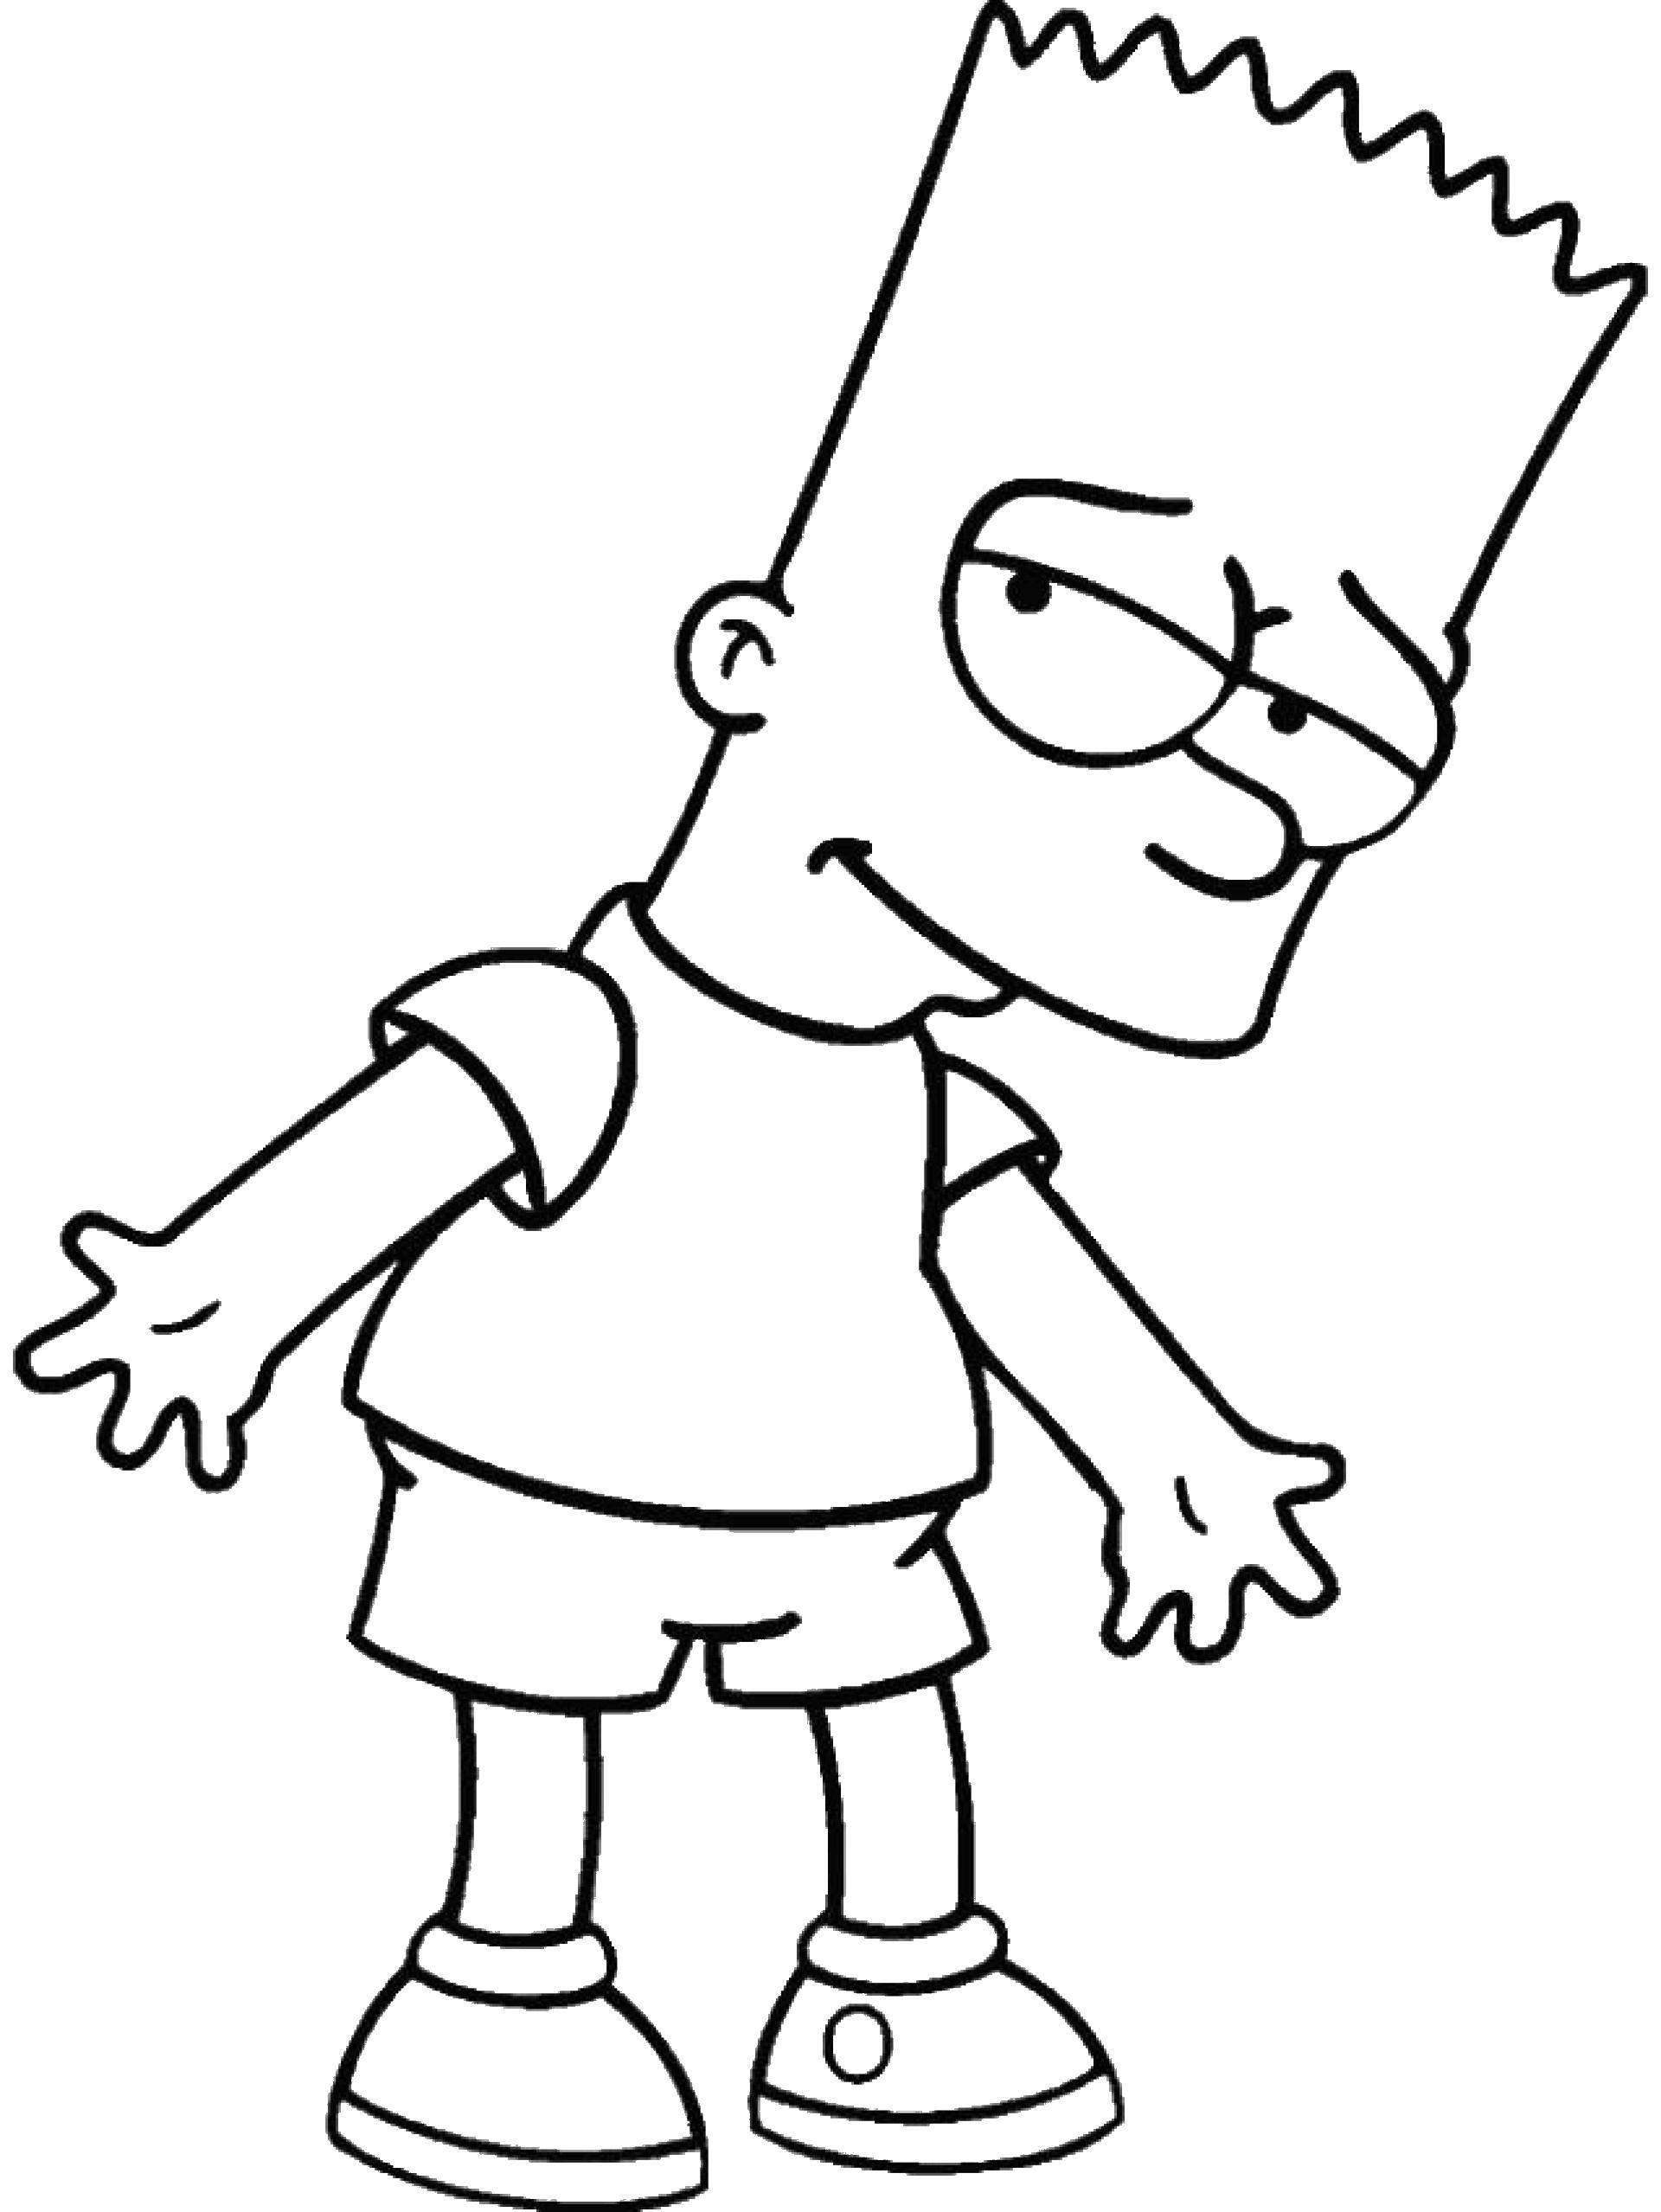 Coloring Bapt Simpson. Category The simpsons. Tags:  Bart, the boy, the Simpsons.